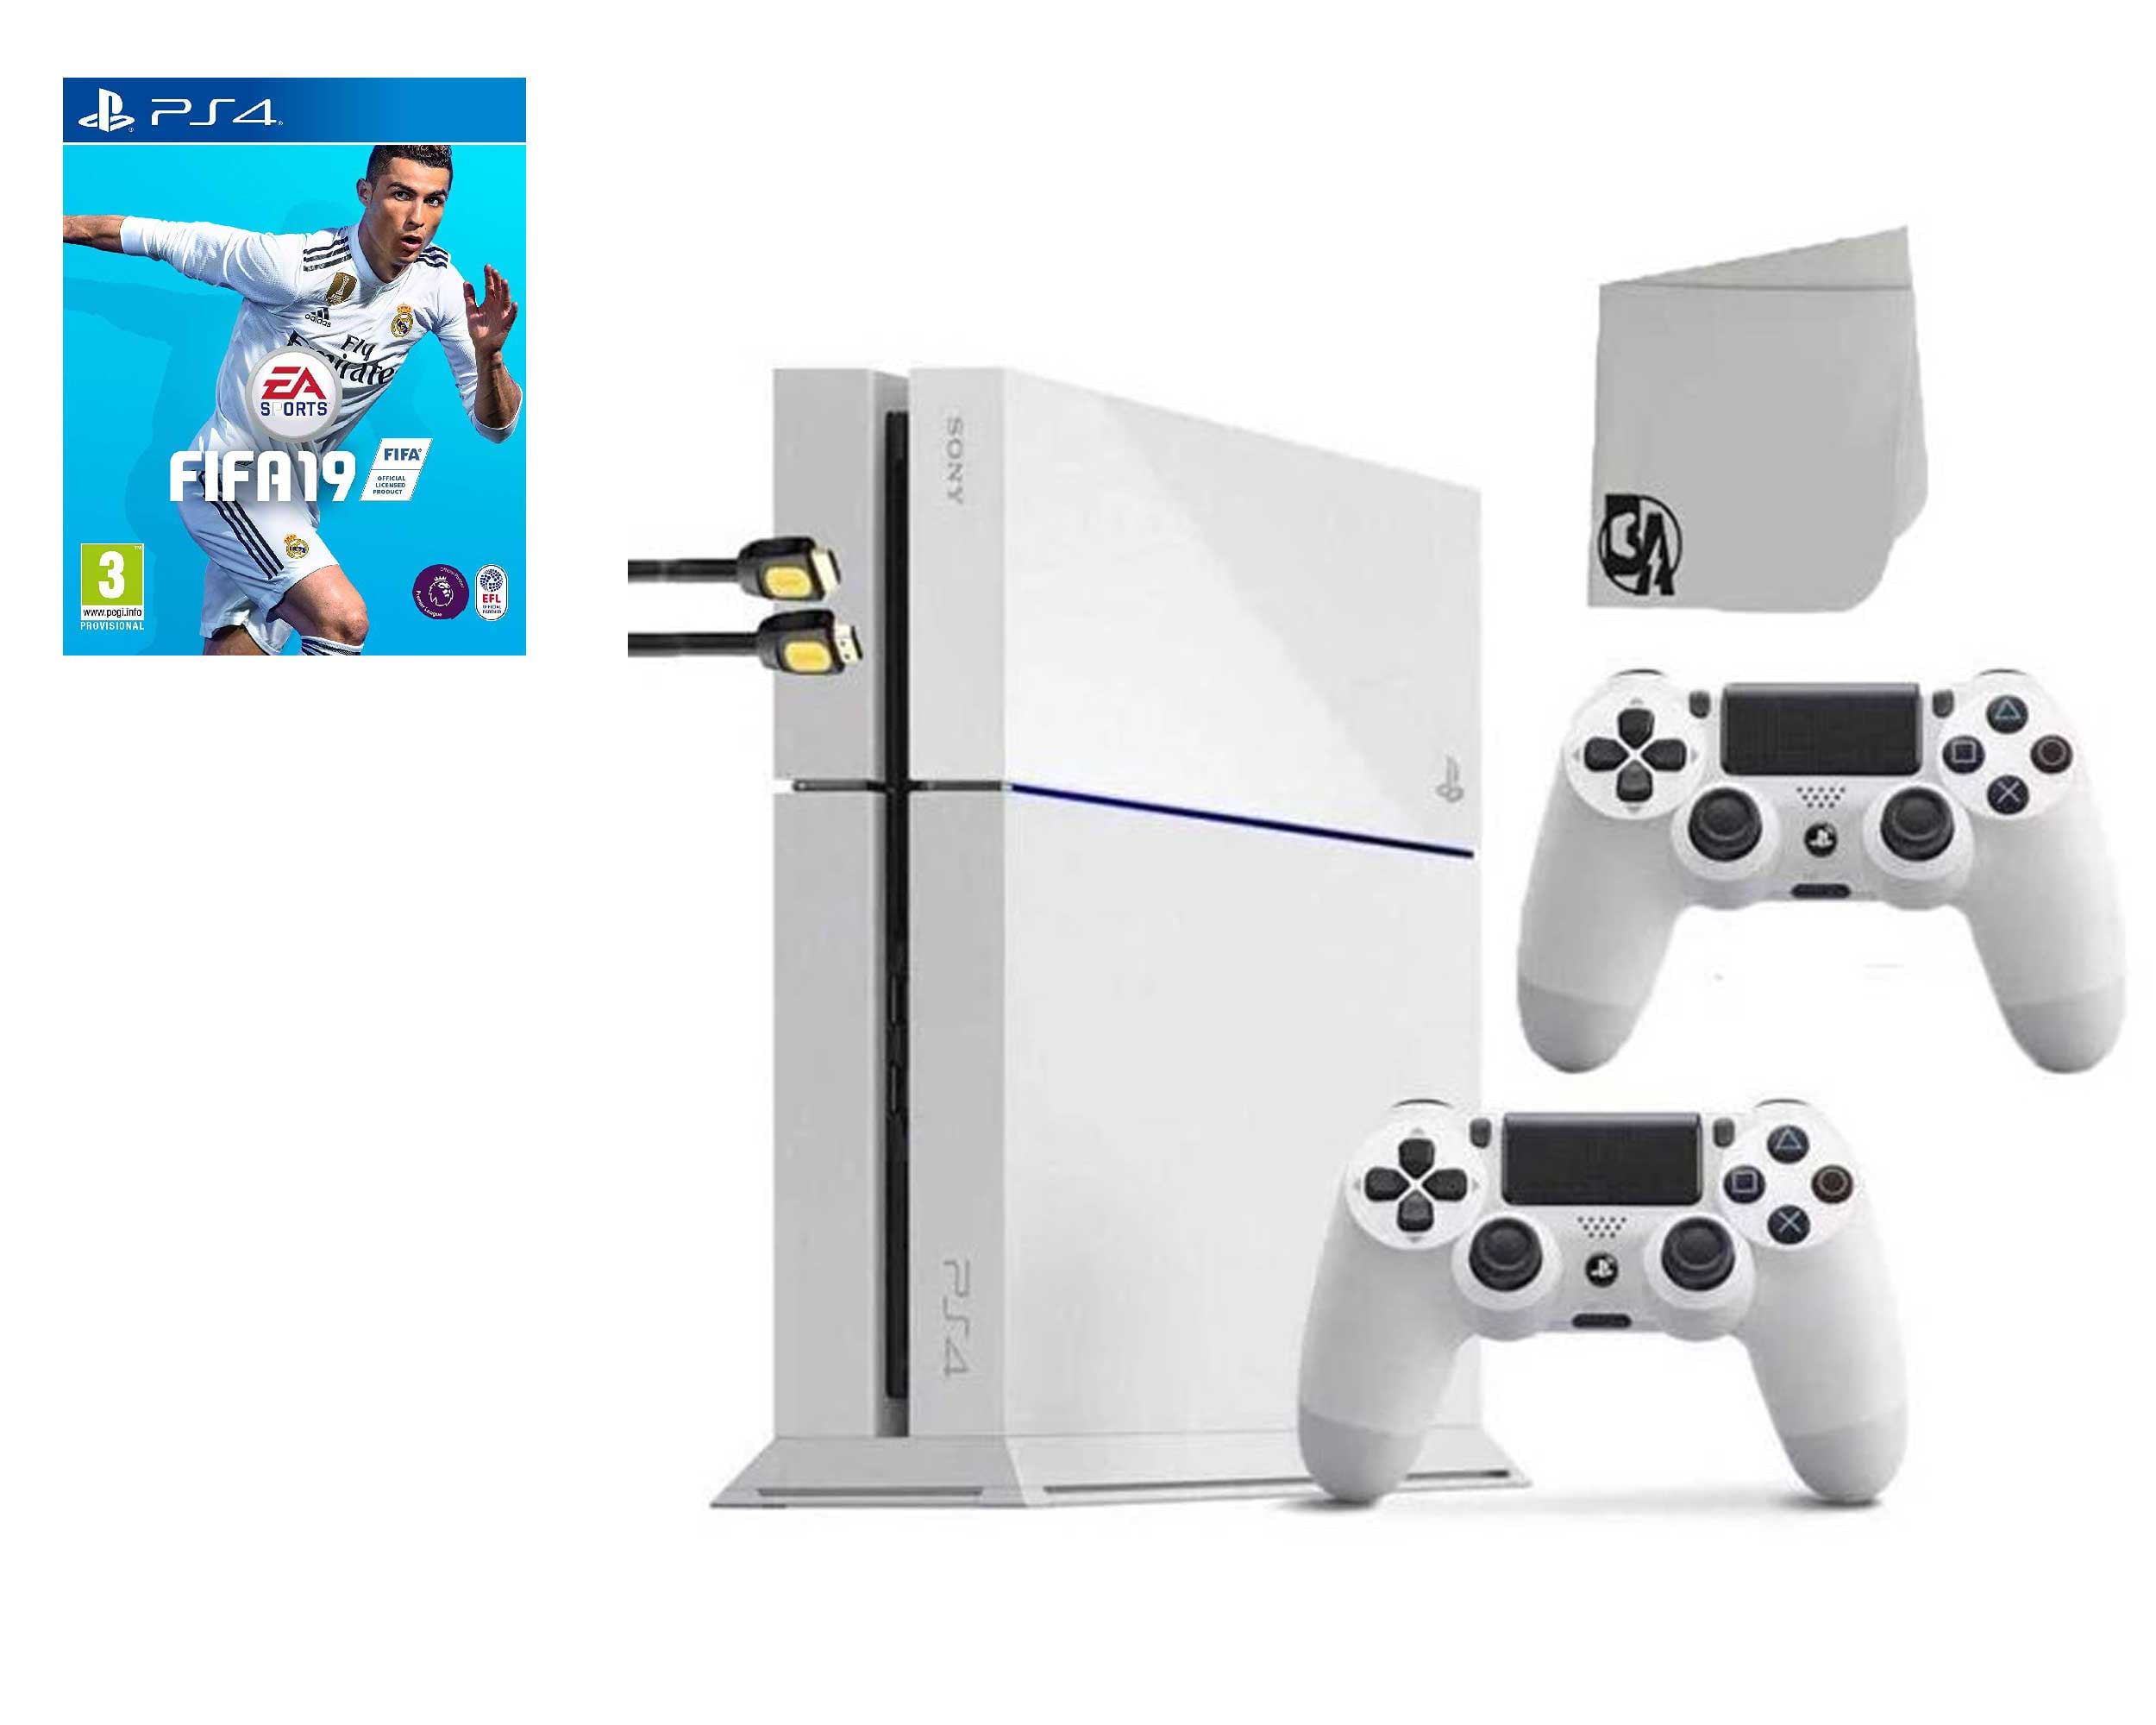 Sony PlayStation 4 Gaming Console White 2 Controller with FIFA-19 AXTION Bundle Like New - Walmart.com